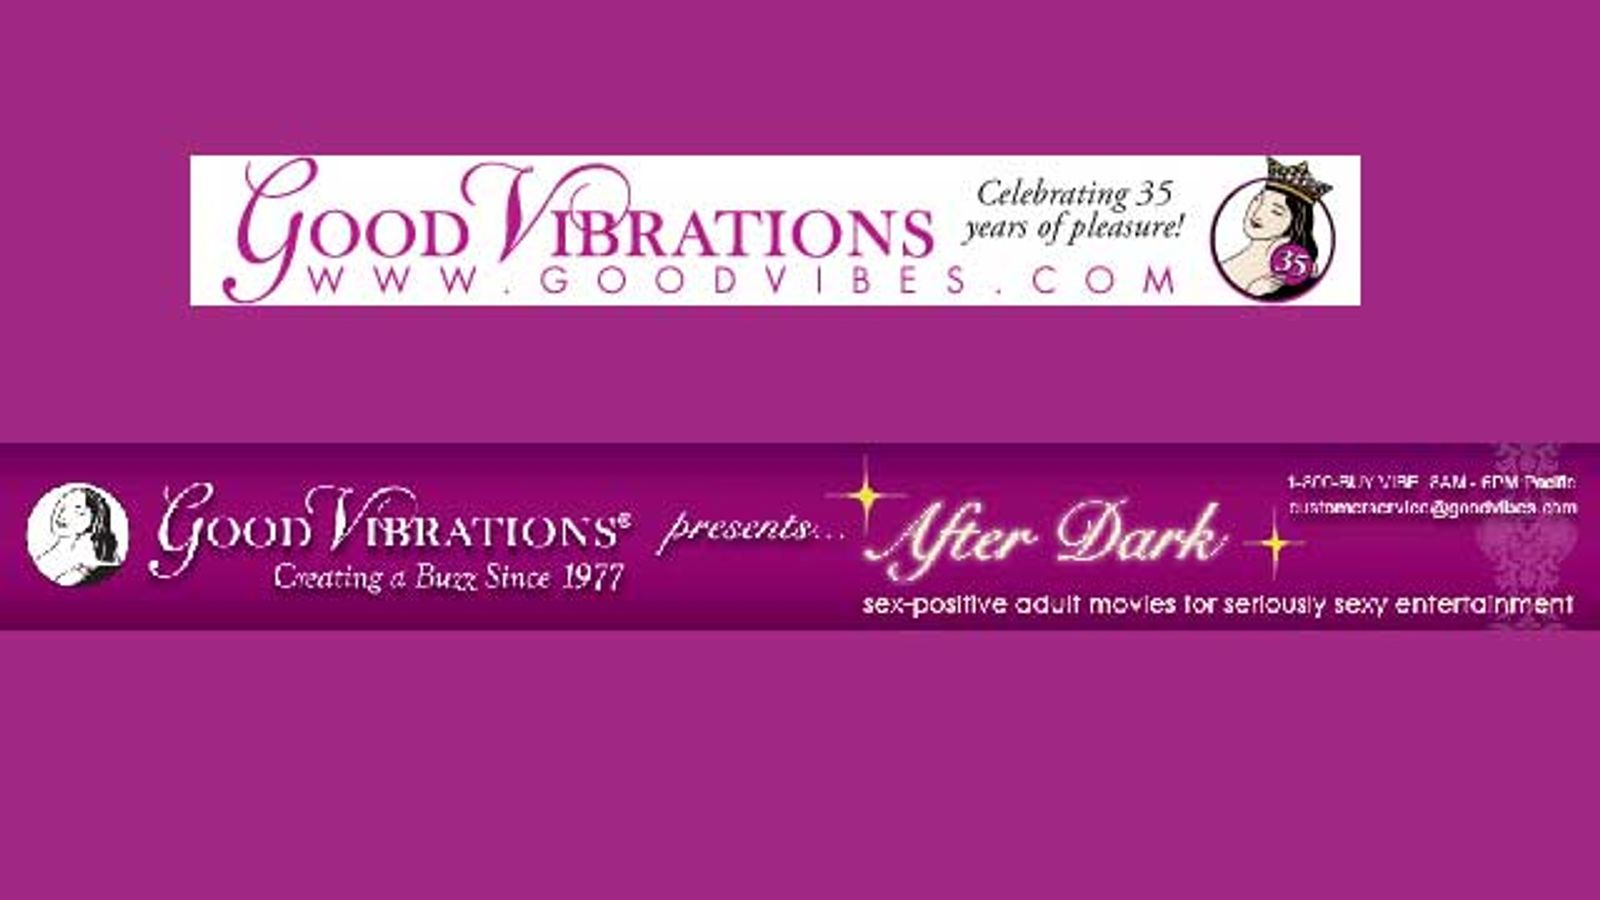 Good Vibrations Launches Feminist Porn-on-Demand Website